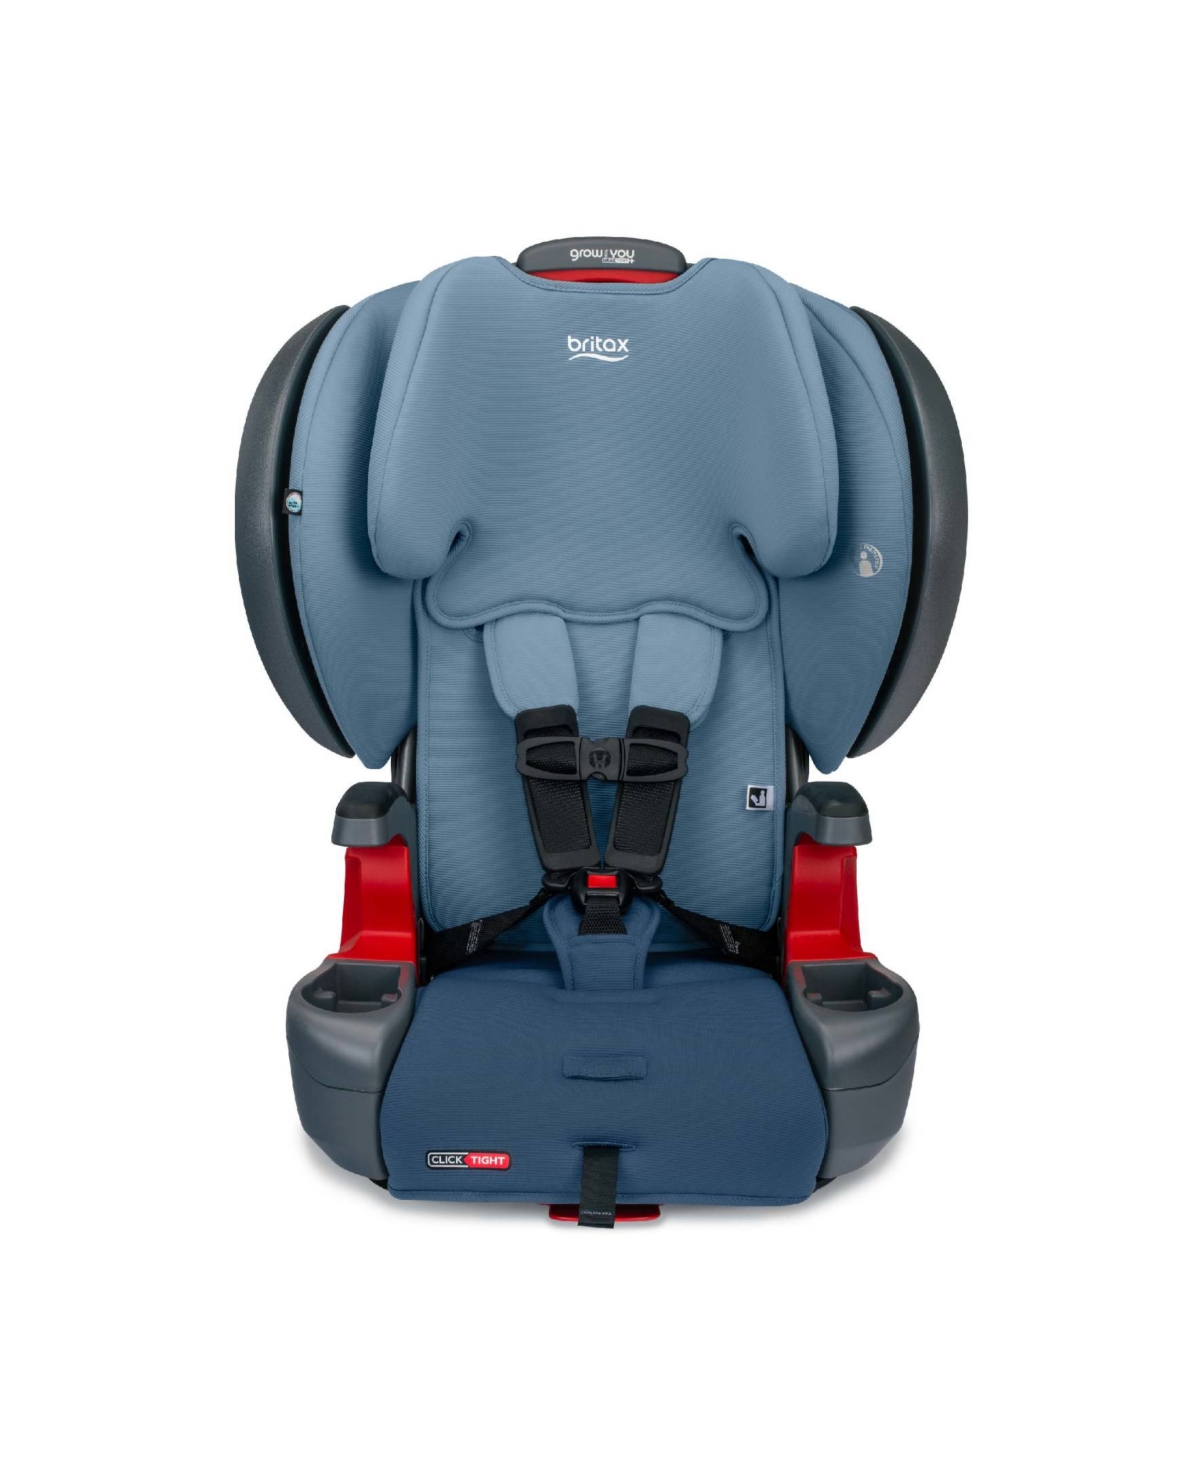 Britax Grow With You Click Tight Harness-2-booster In Blue Ombre